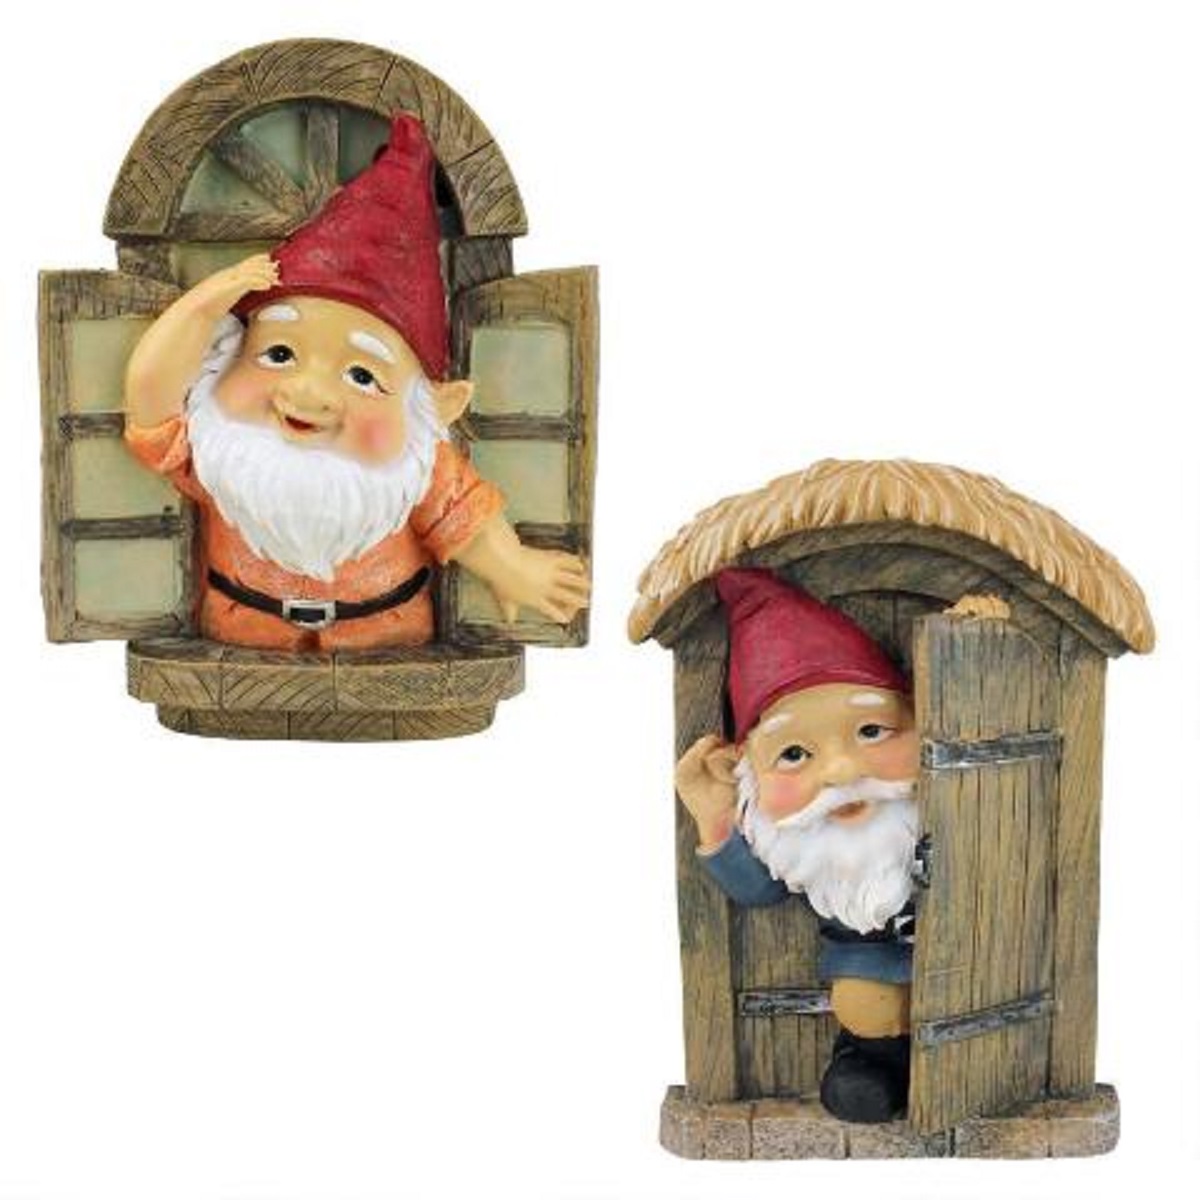 Outdoor Living and Style Set Of 2 Knothole Gnomes Hand Painted Outdoor Garden Tree Sculpture 9"